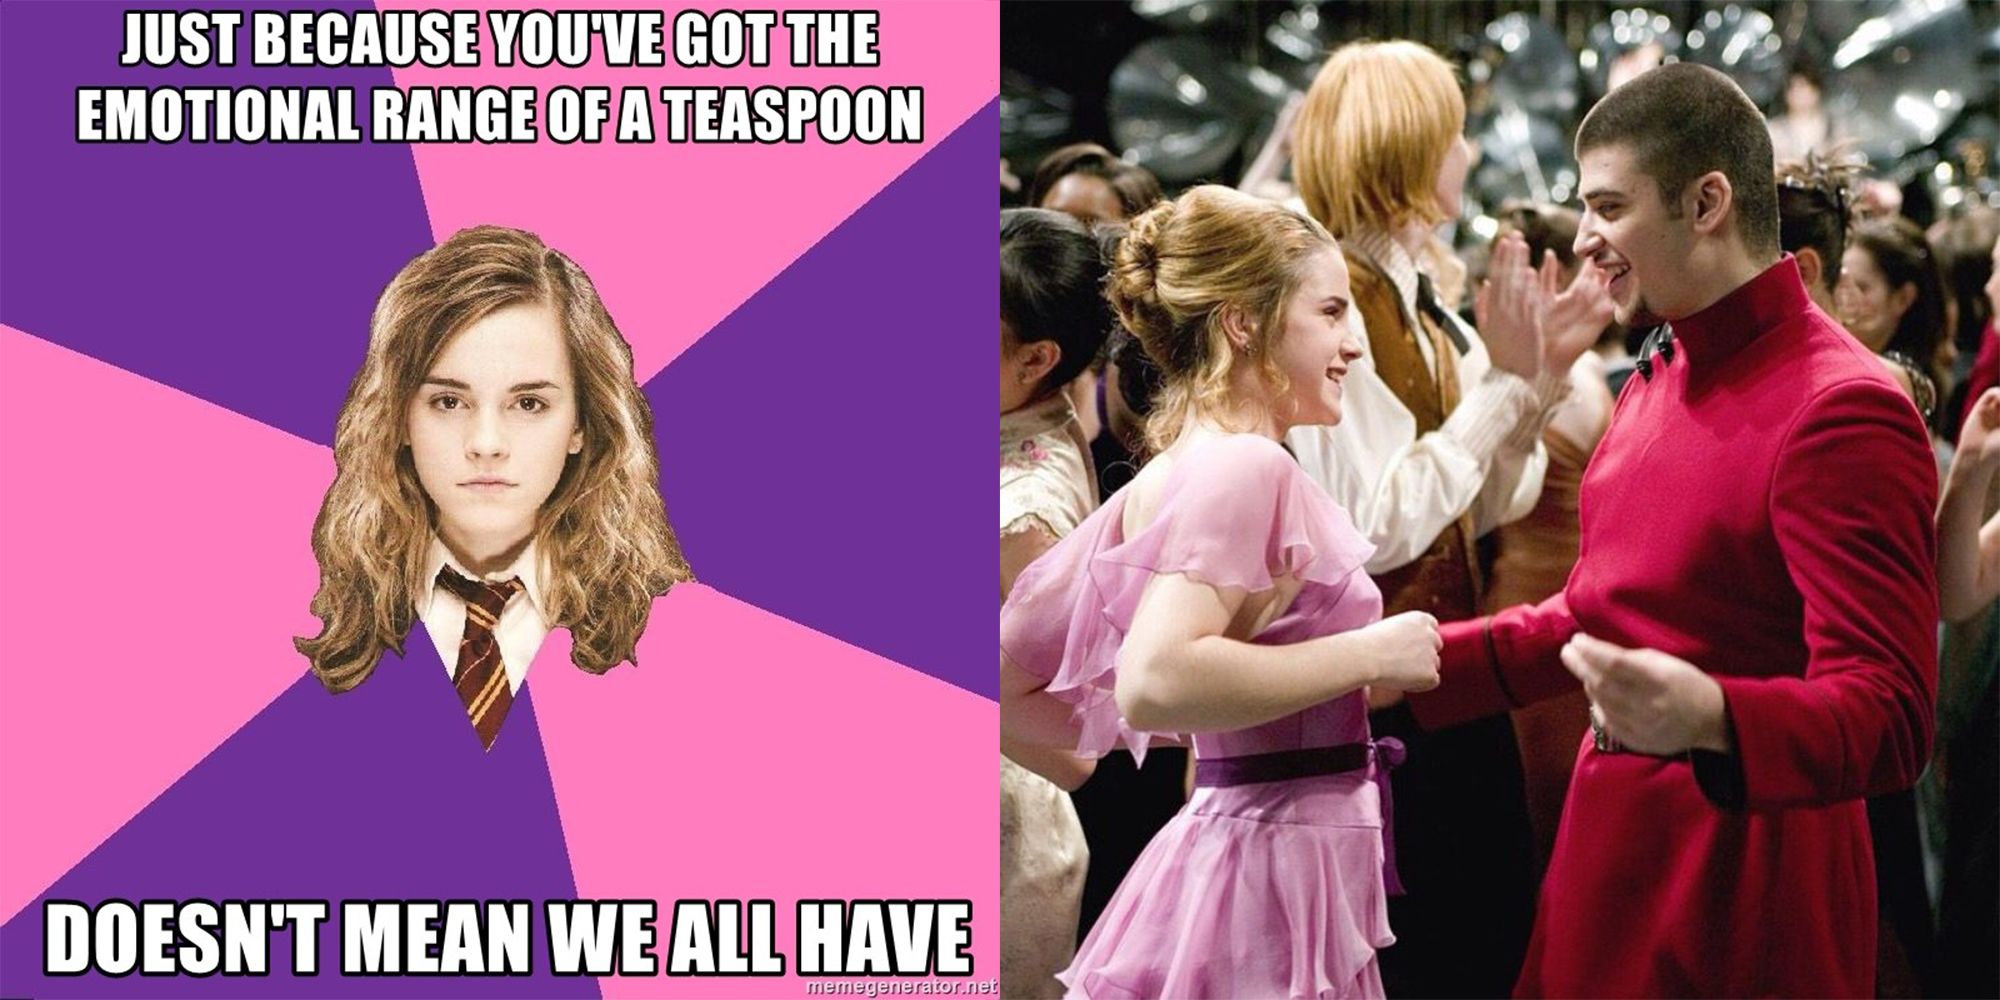 Split image of Hermione in a meme, and her dancing with Krum in Harry Potter.